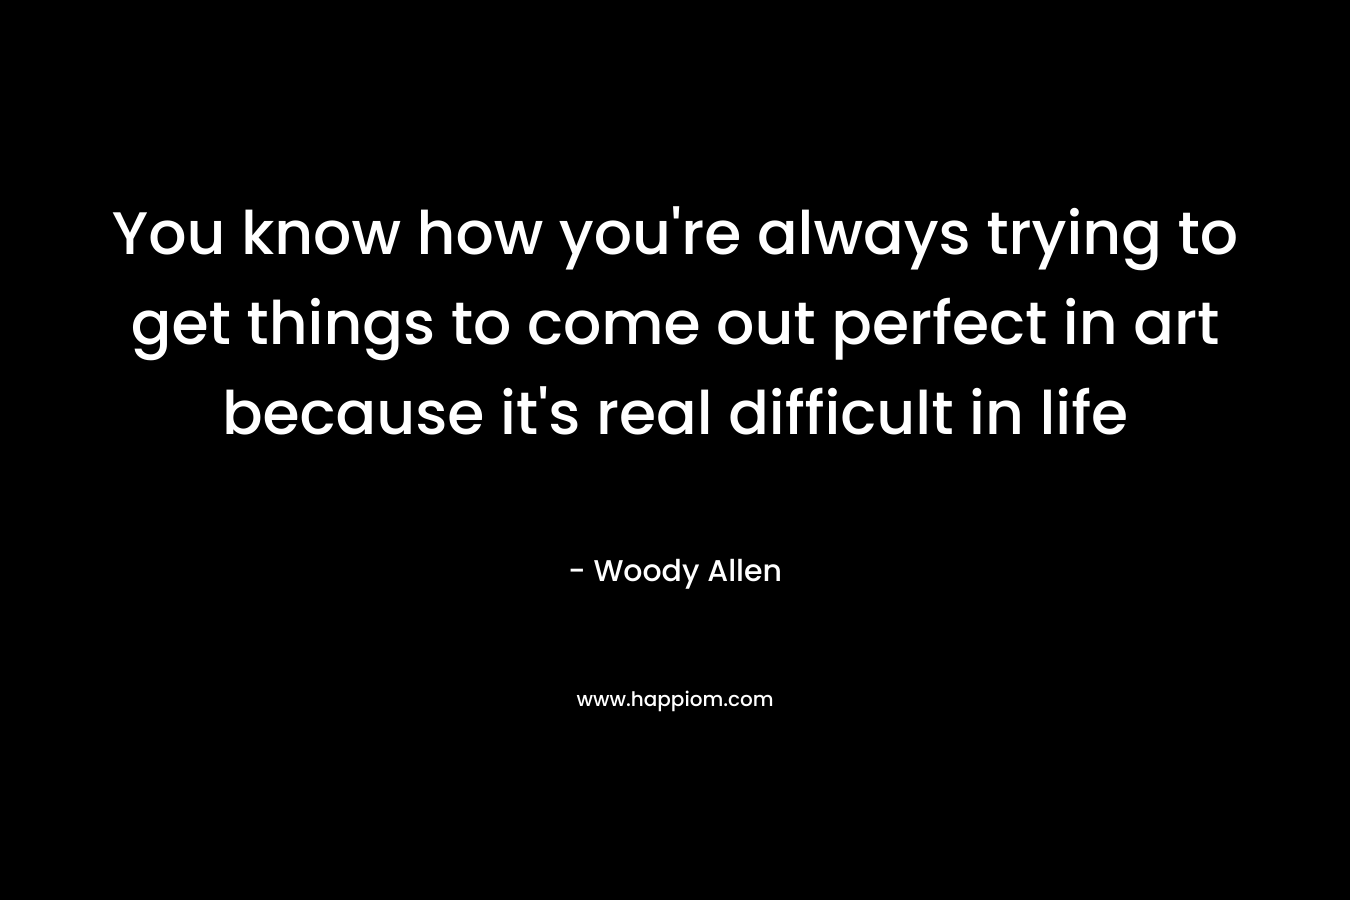 You know how you’re always trying to get things to come out perfect in art because it’s real difficult in life – Woody Allen